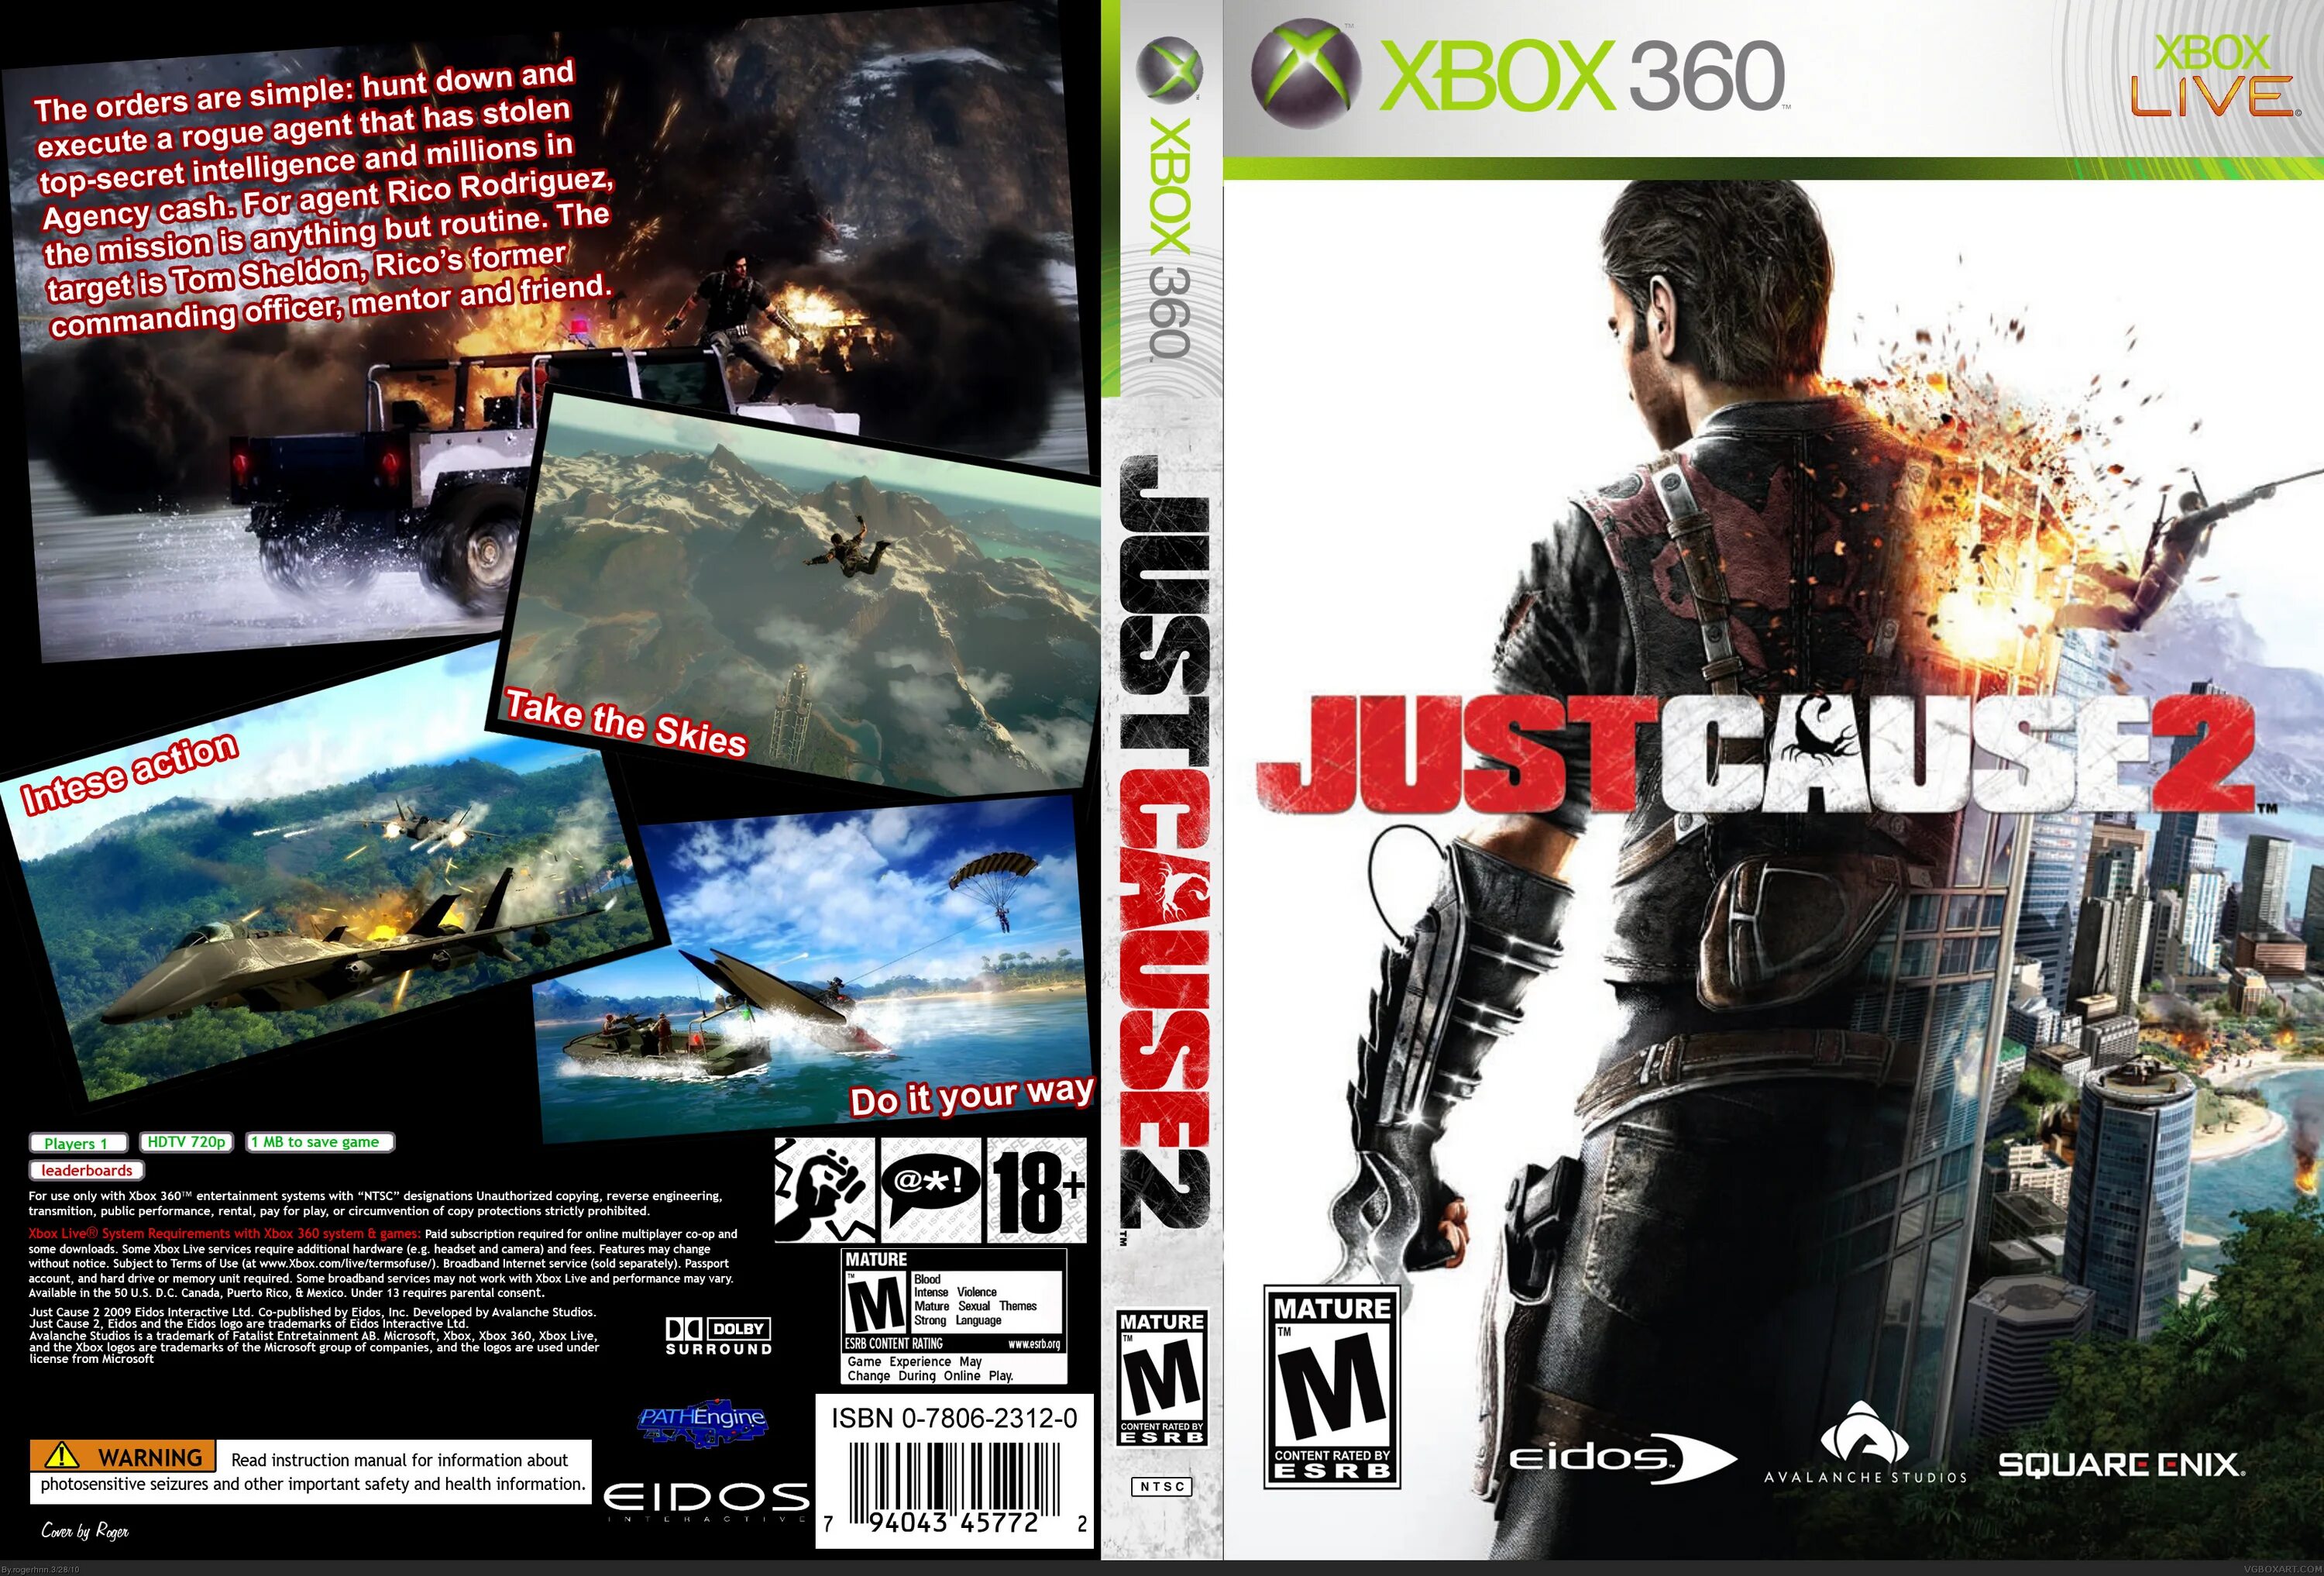 Just cause 2 Xbox 360 обложка. Just cause Xbox 360. Just cause 2 диск. Just cause 1 Xbox 360. Игры на икс бокс 360 freeboot